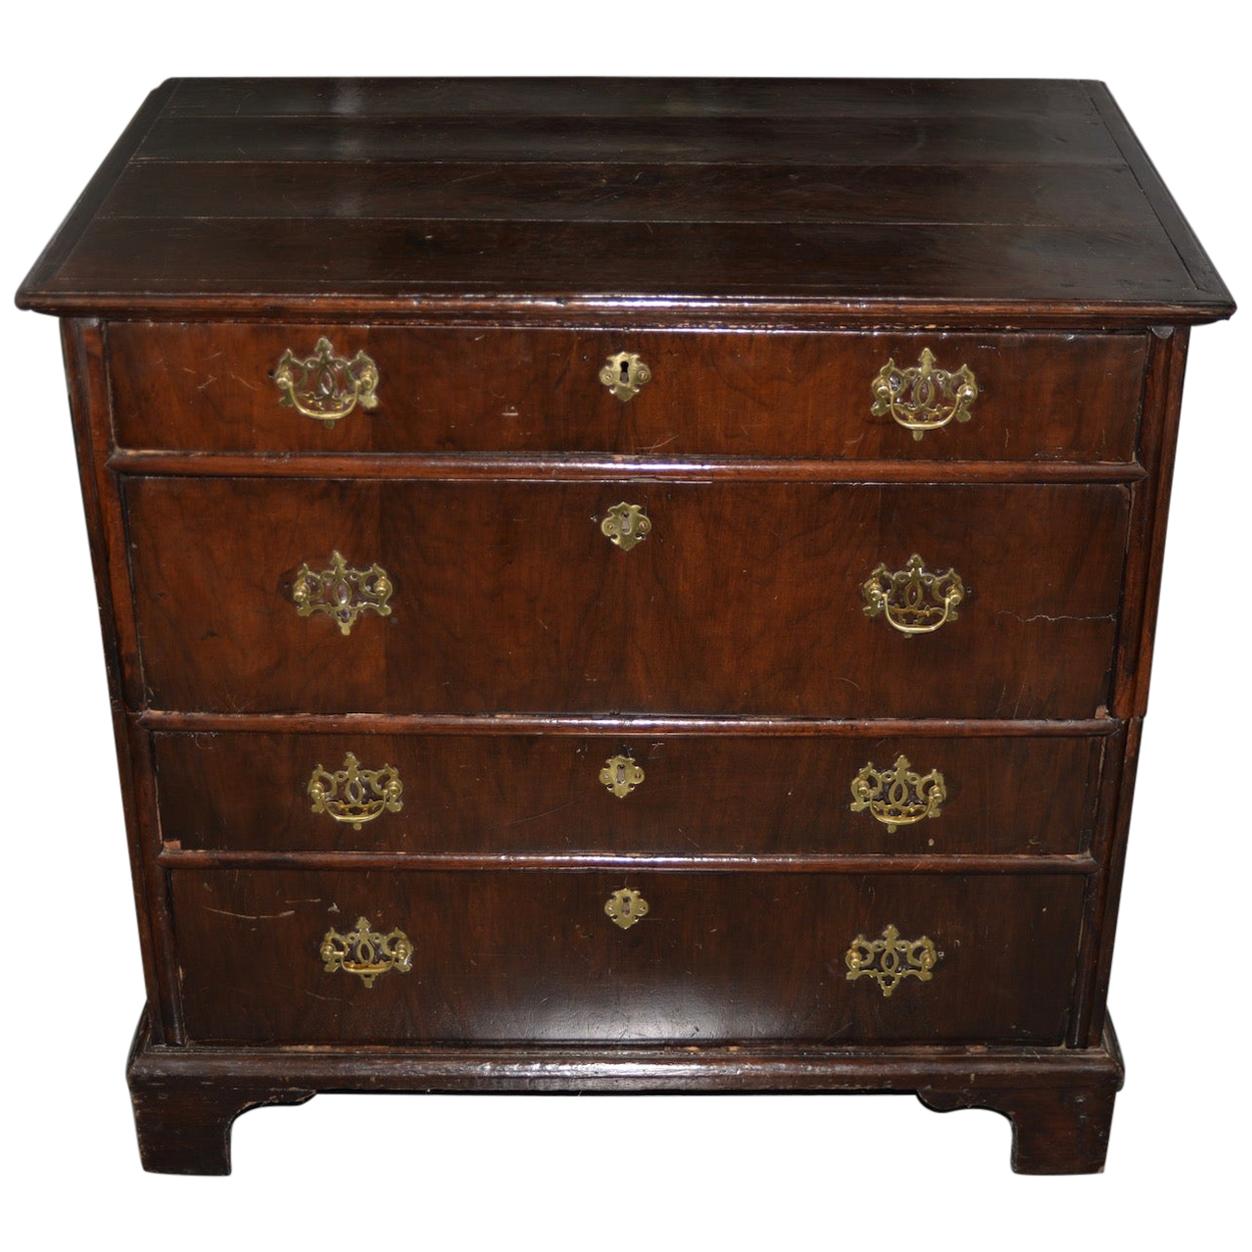 Early American George III Mahogany Chest of Drawers, 18th-19th Century